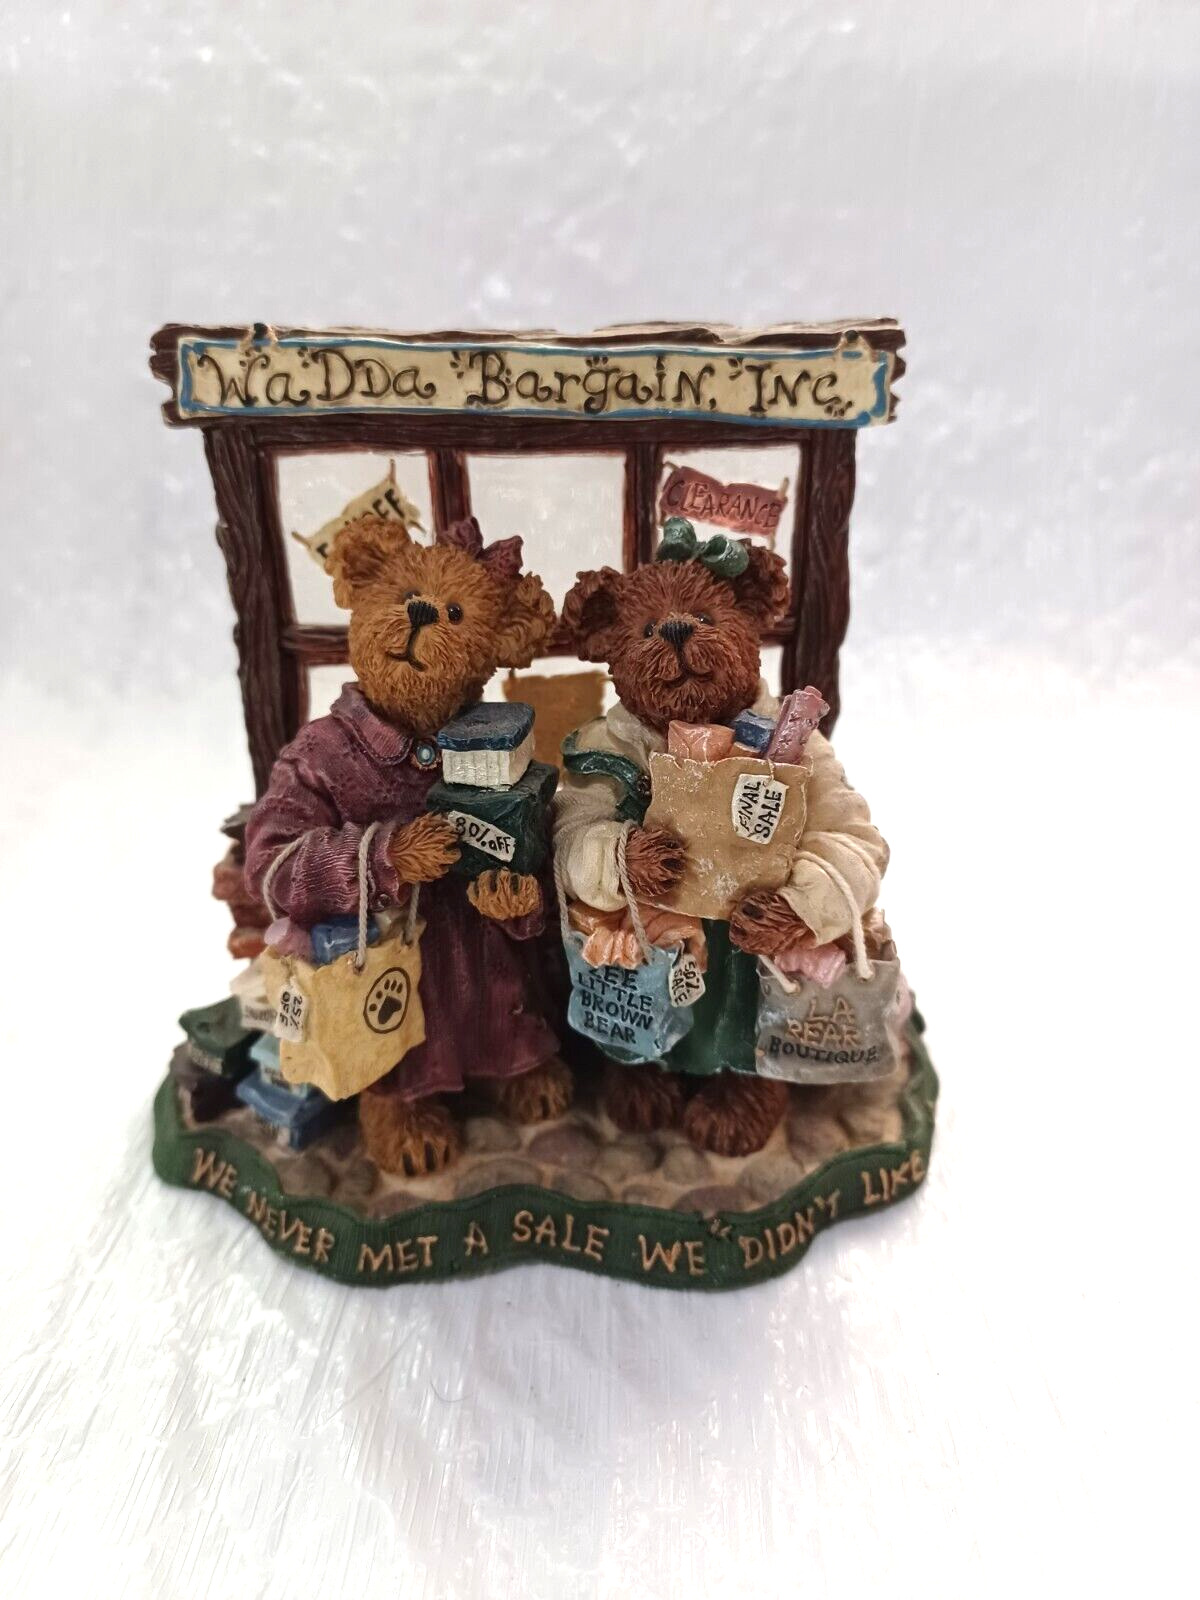 Vintage Boyds Bears and Friends Pam & Kristi Shopsalot What a Bargain Figurine